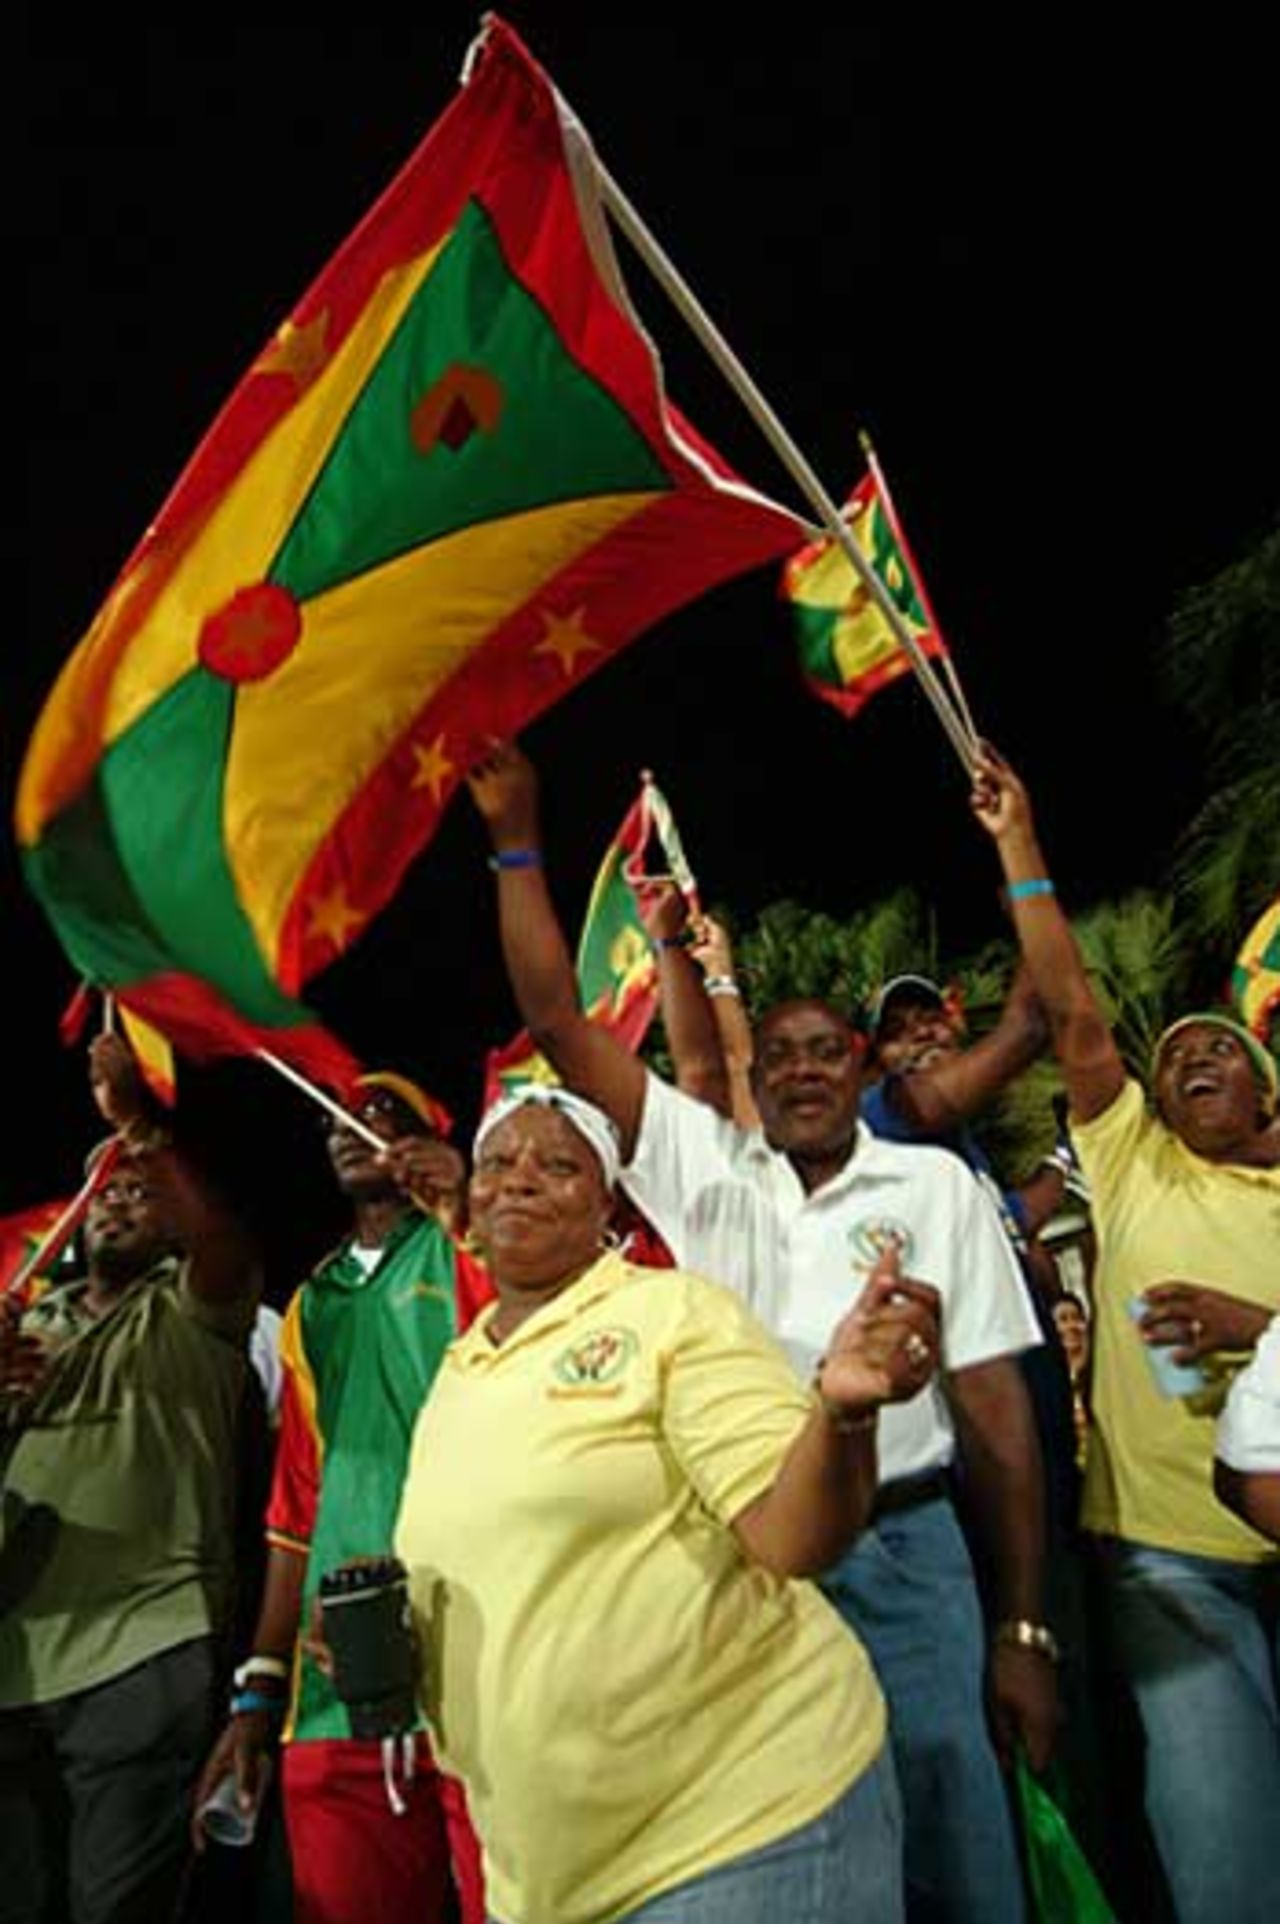 Grenada fans celebrate a quick and exciting start to their innings, Grenada v Guyana, Stanford 20/20, 1st semi-final, 10 August 2006

